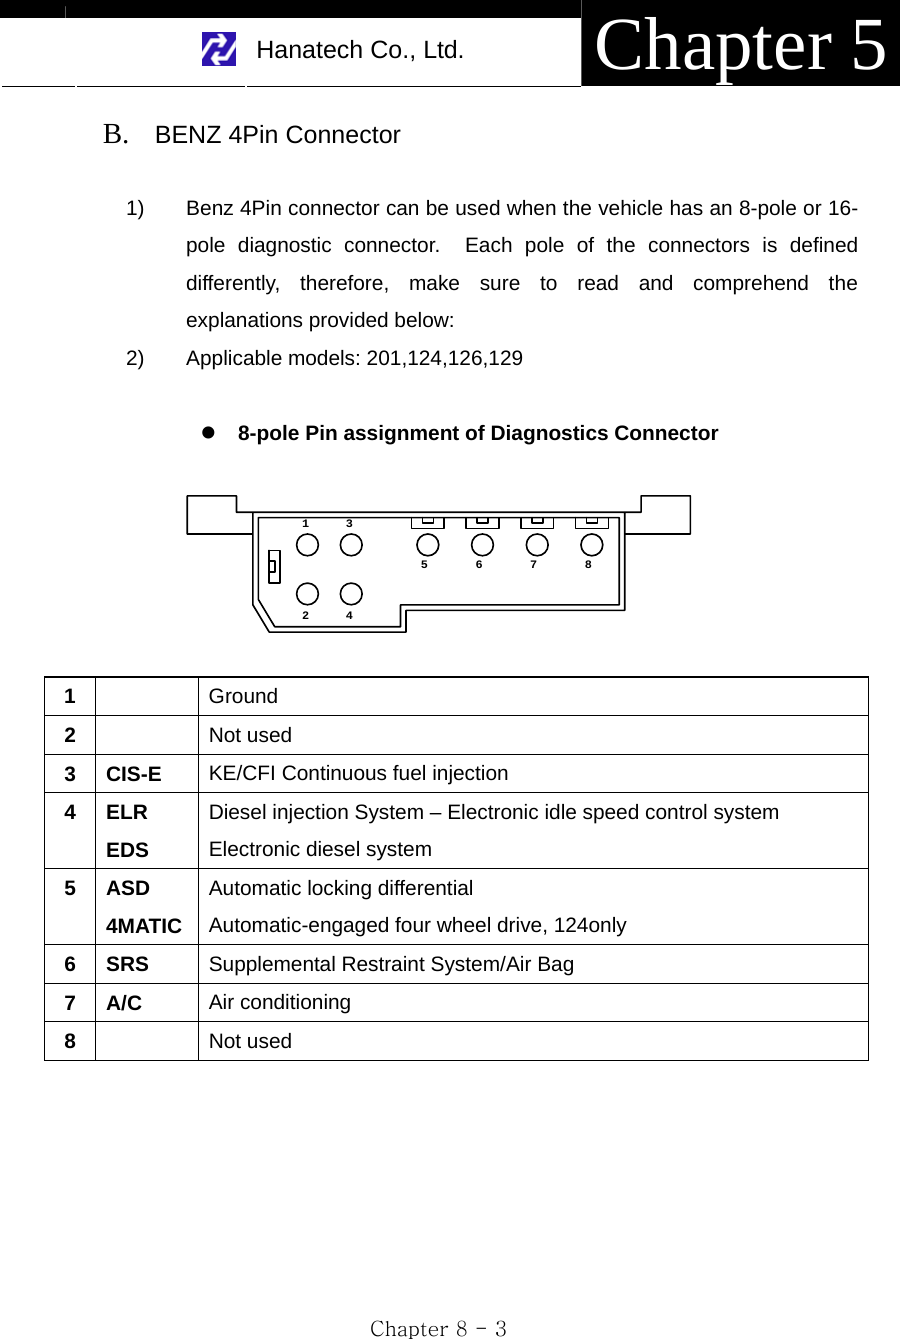     Hanatech Co., Ltd.  Chapter 5 Chapter 8 - 3 B.  BENZ 4Pin Connector  1)  Benz 4Pin connector can be used when the vehicle has an 8-pole or 16-pole diagnostic connector.  Each pole of the connectors is defined differently, therefore, make sure to read and comprehend the explanations provided below: 2)  Applicable models: 201,124,126,129  z 8-pole Pin assignment of Diagnostics Connector  24531786  1   Ground 2   Not used 3 CIS-E  KE/CFI Continuous fuel injection 4 ELR EDS Diesel injection System – Electronic idle speed control system Electronic diesel system 5 ASD 4MATIC Automatic locking differential Automatic-engaged four wheel drive, 124only 6 SRS  Supplemental Restraint System/Air Bag 7 A/C  Air conditioning 8   Not used       